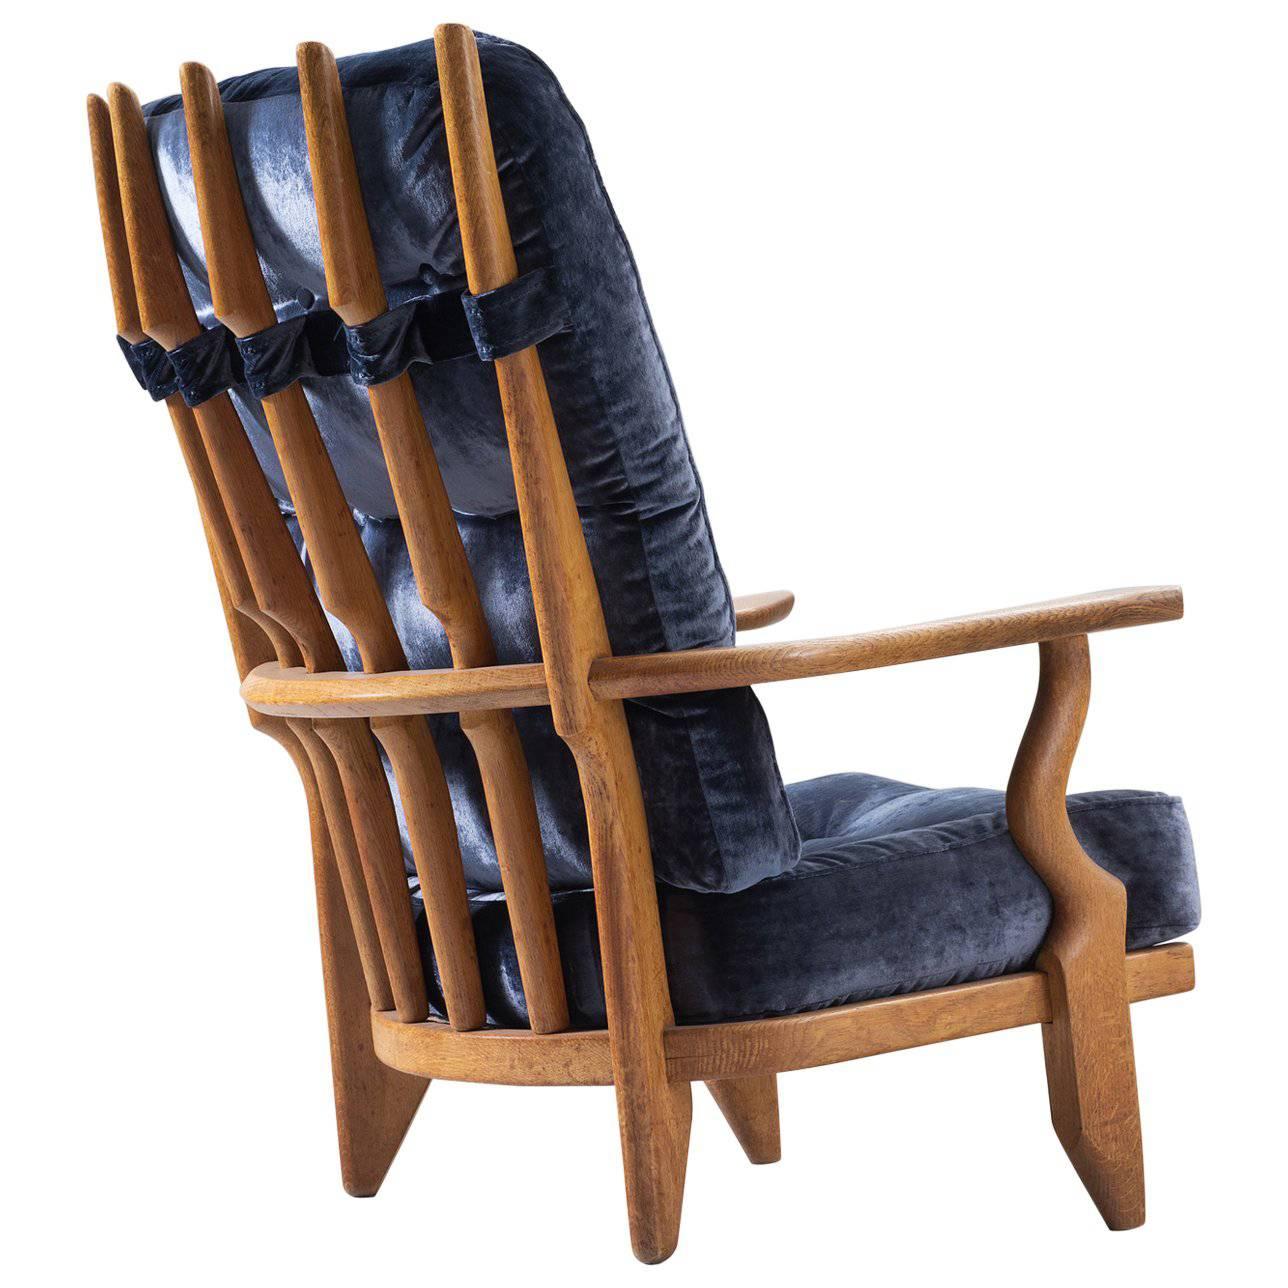 Guillerme & Chambron High Back Lounge Chair with Blue Velvet Upholstery